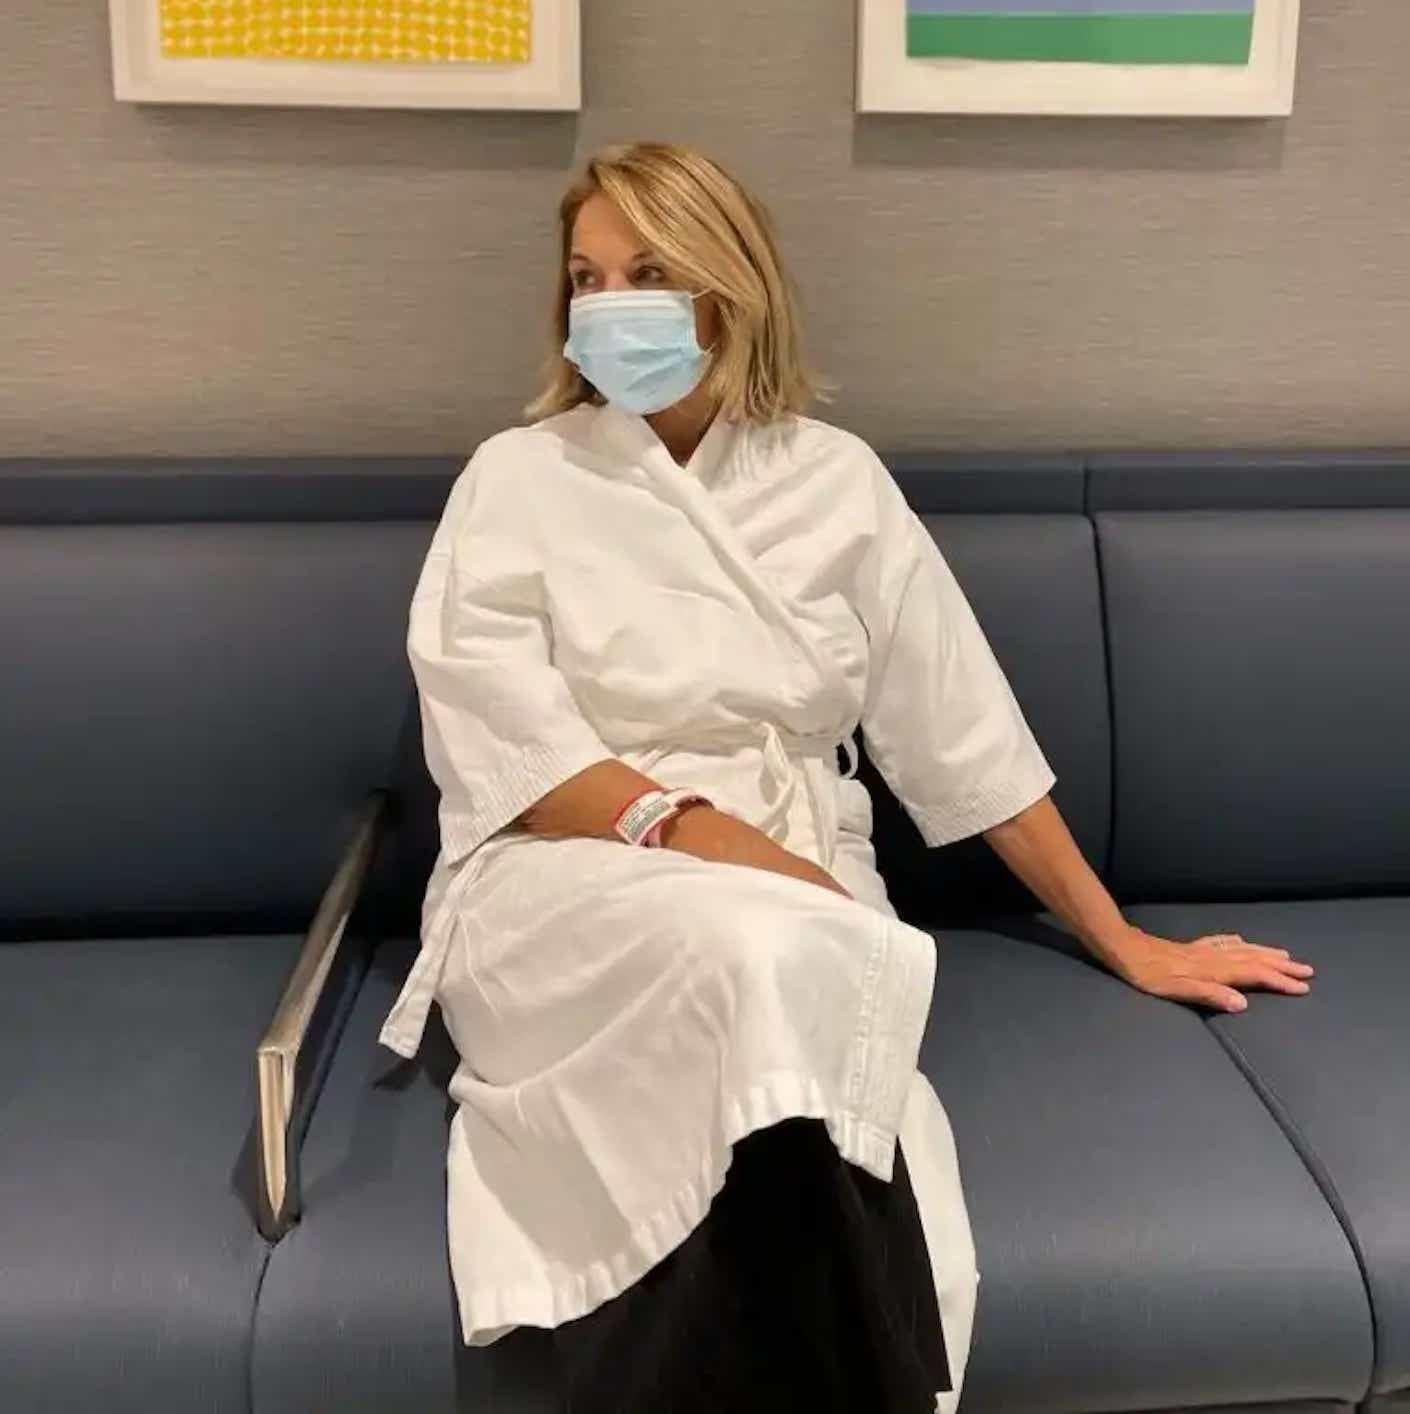 katie couric in a white hospital gown